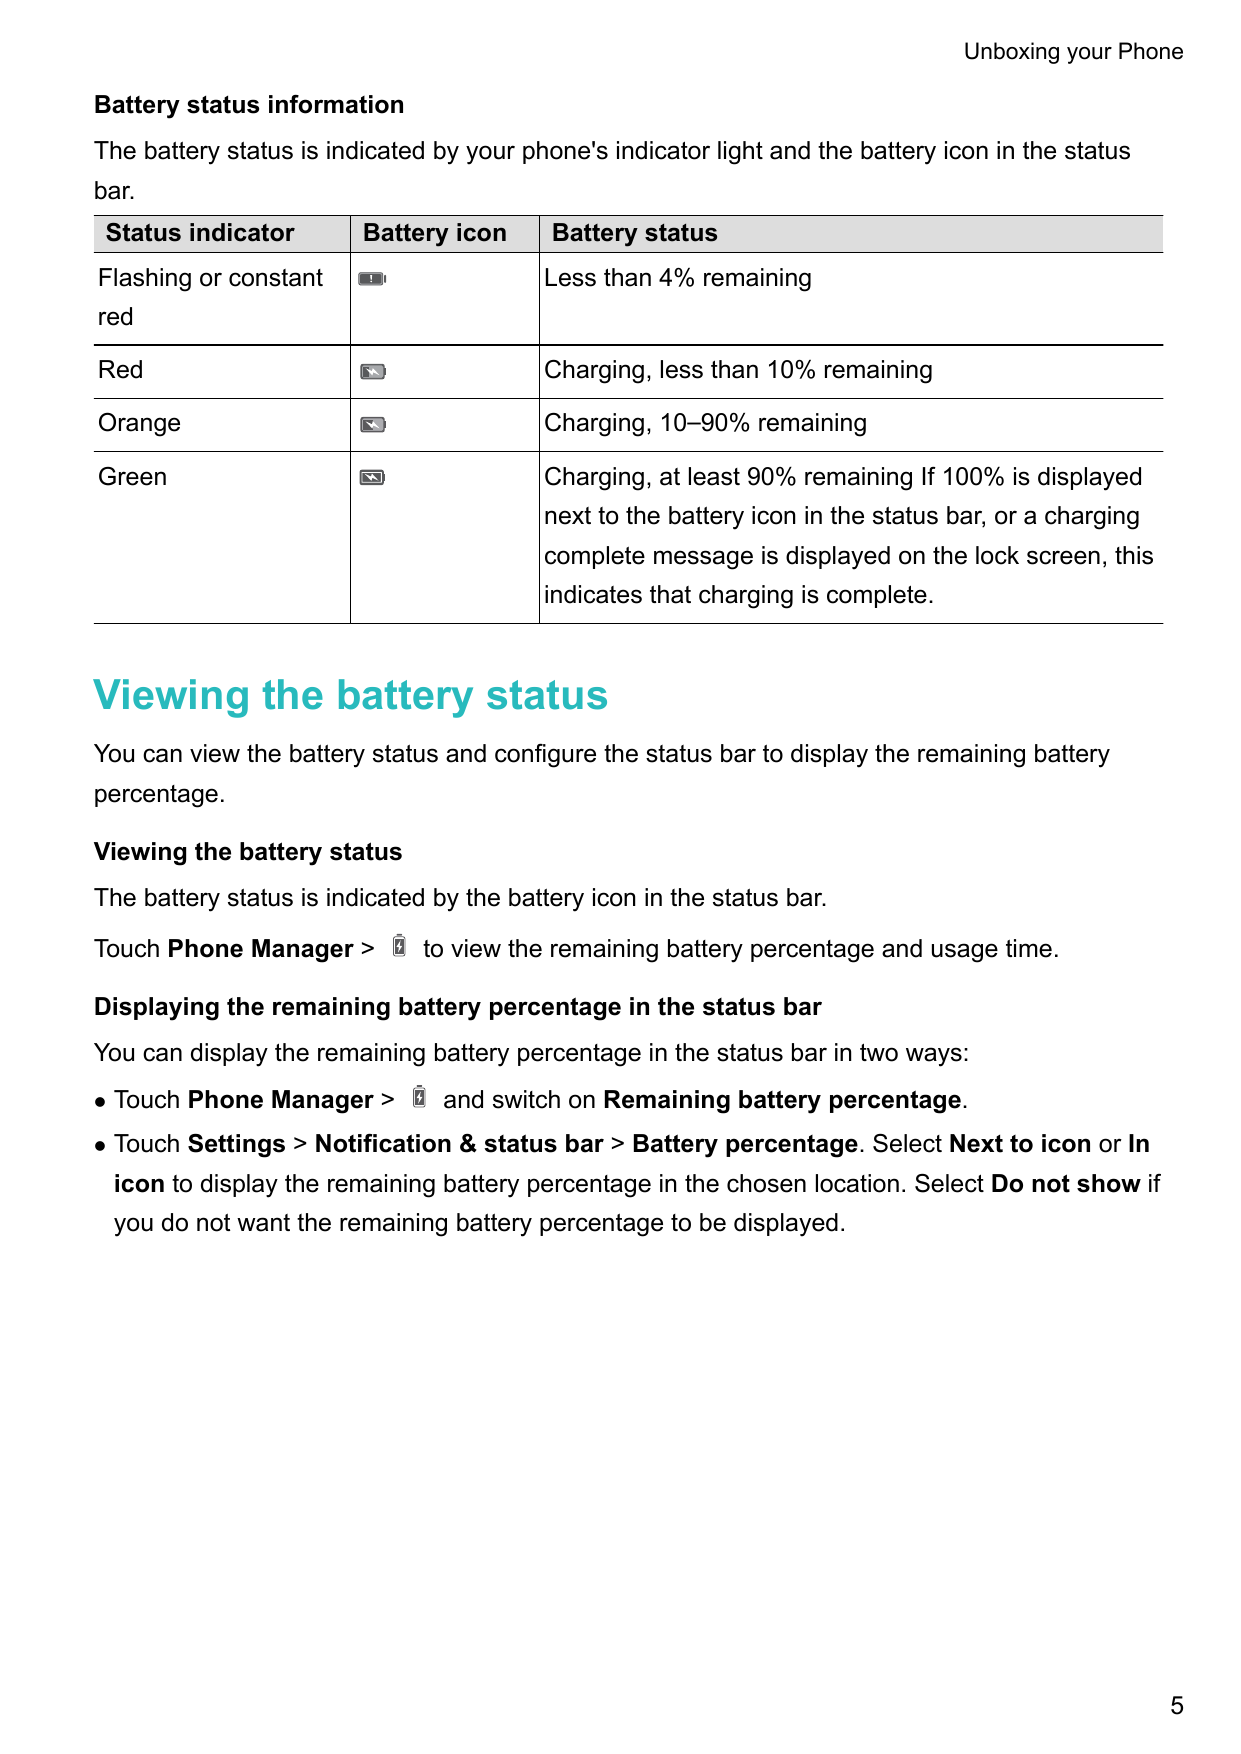 Unboxing your PhoneBattery status informationThe battery status is indicated by your phone's indicator light and the battery ico